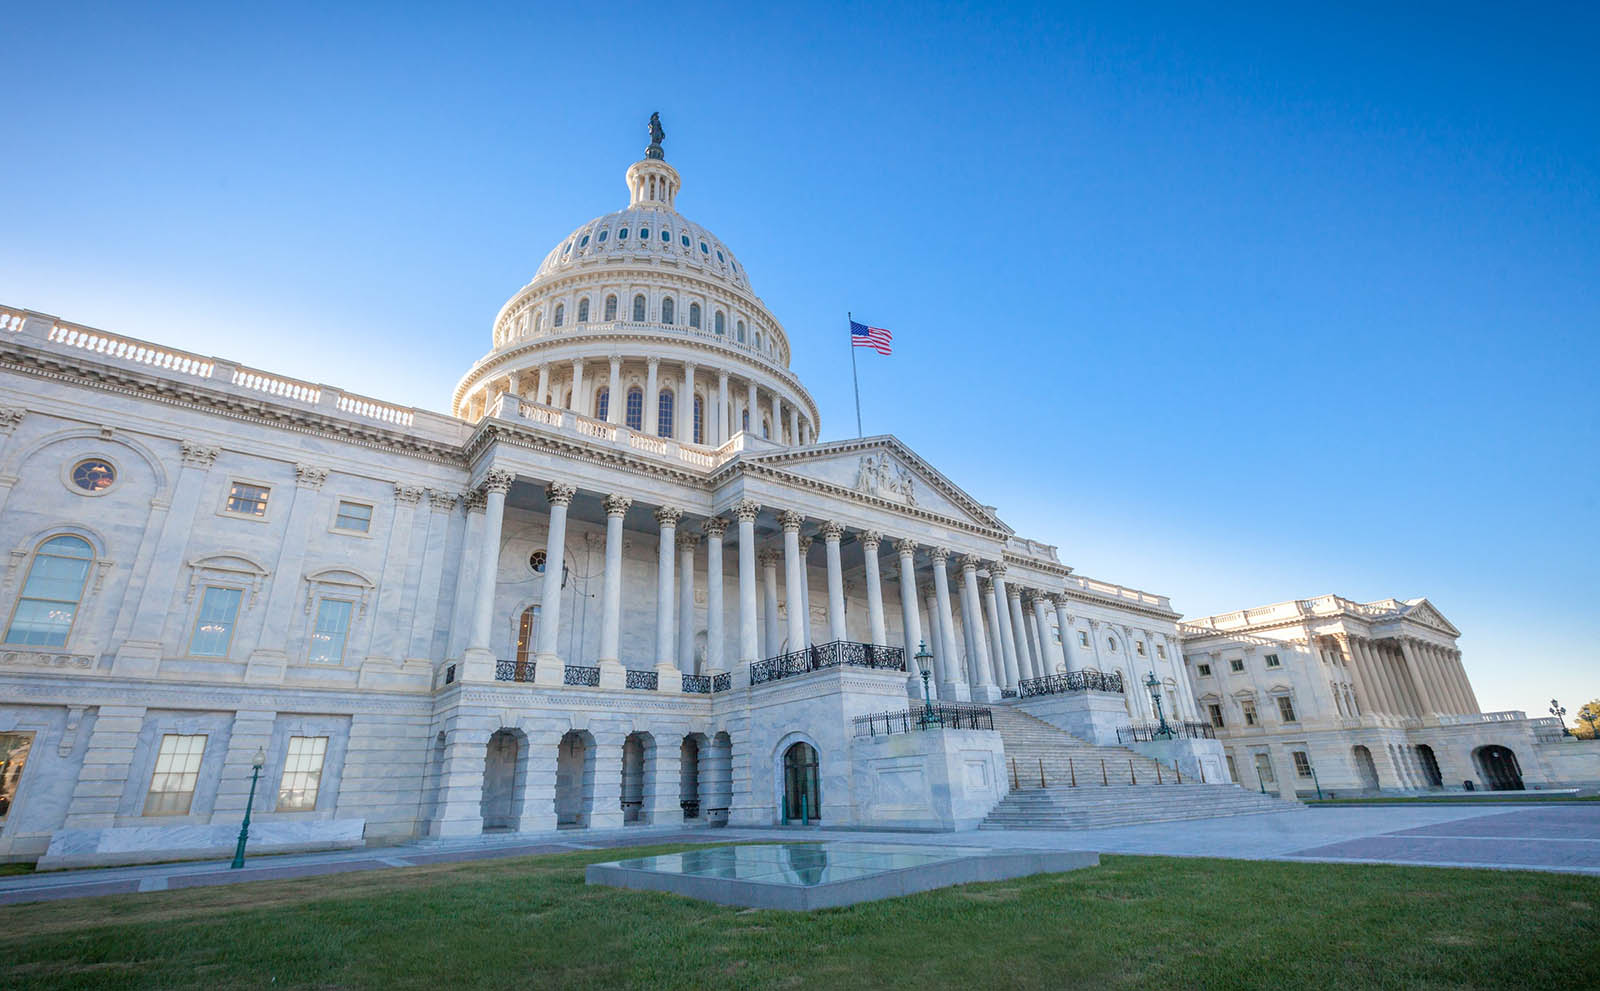 Every Answer to This General Knowledge Quiz Is a Number – Can You Get 14/18? Us Capitol Building Government